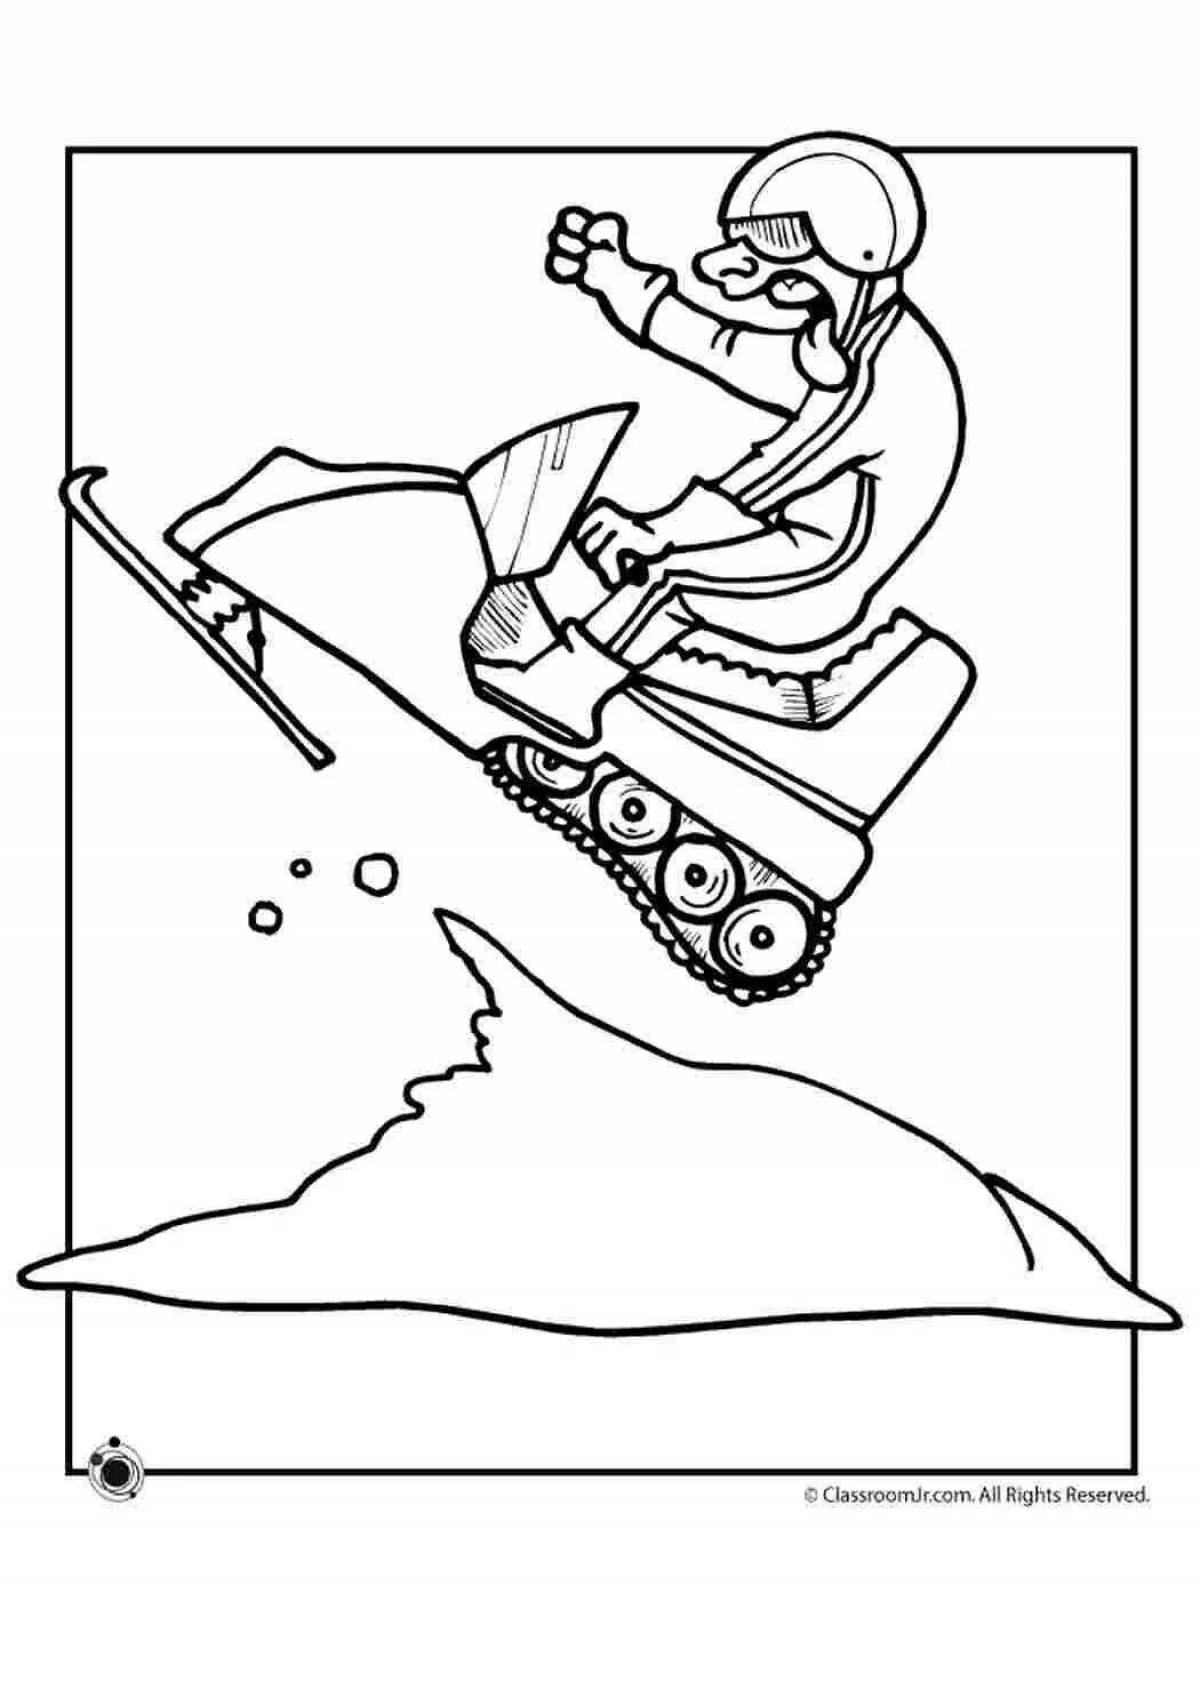 Dynamic snowmobile coloring book for kids